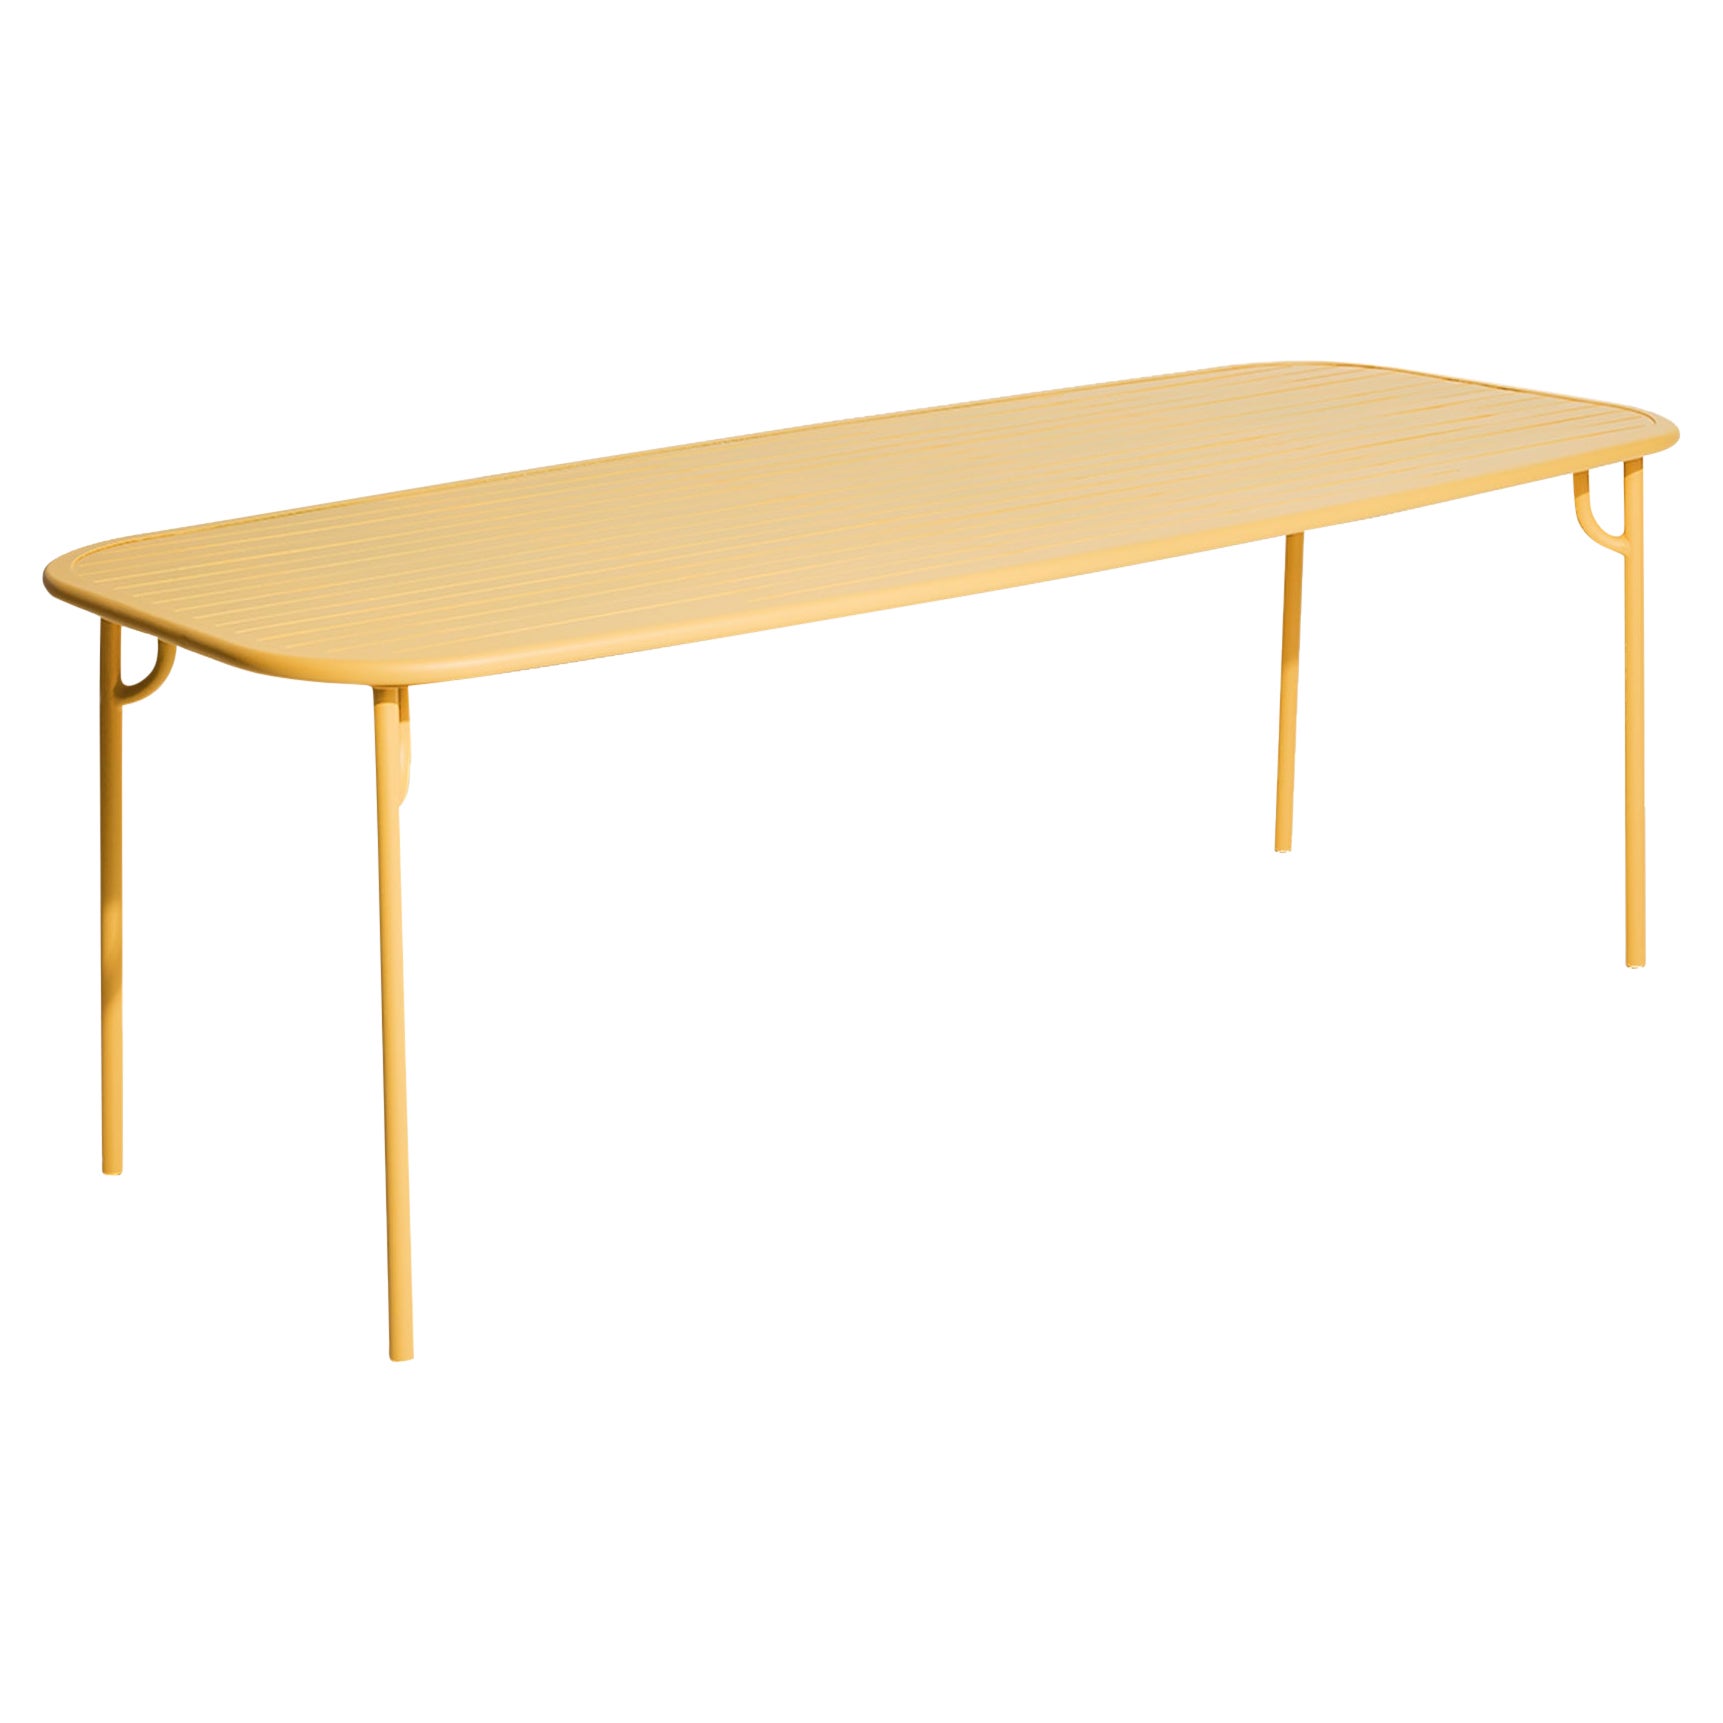 Petite Friture Week-End Large Rectangular Dining Table in Saffron with Slats For Sale